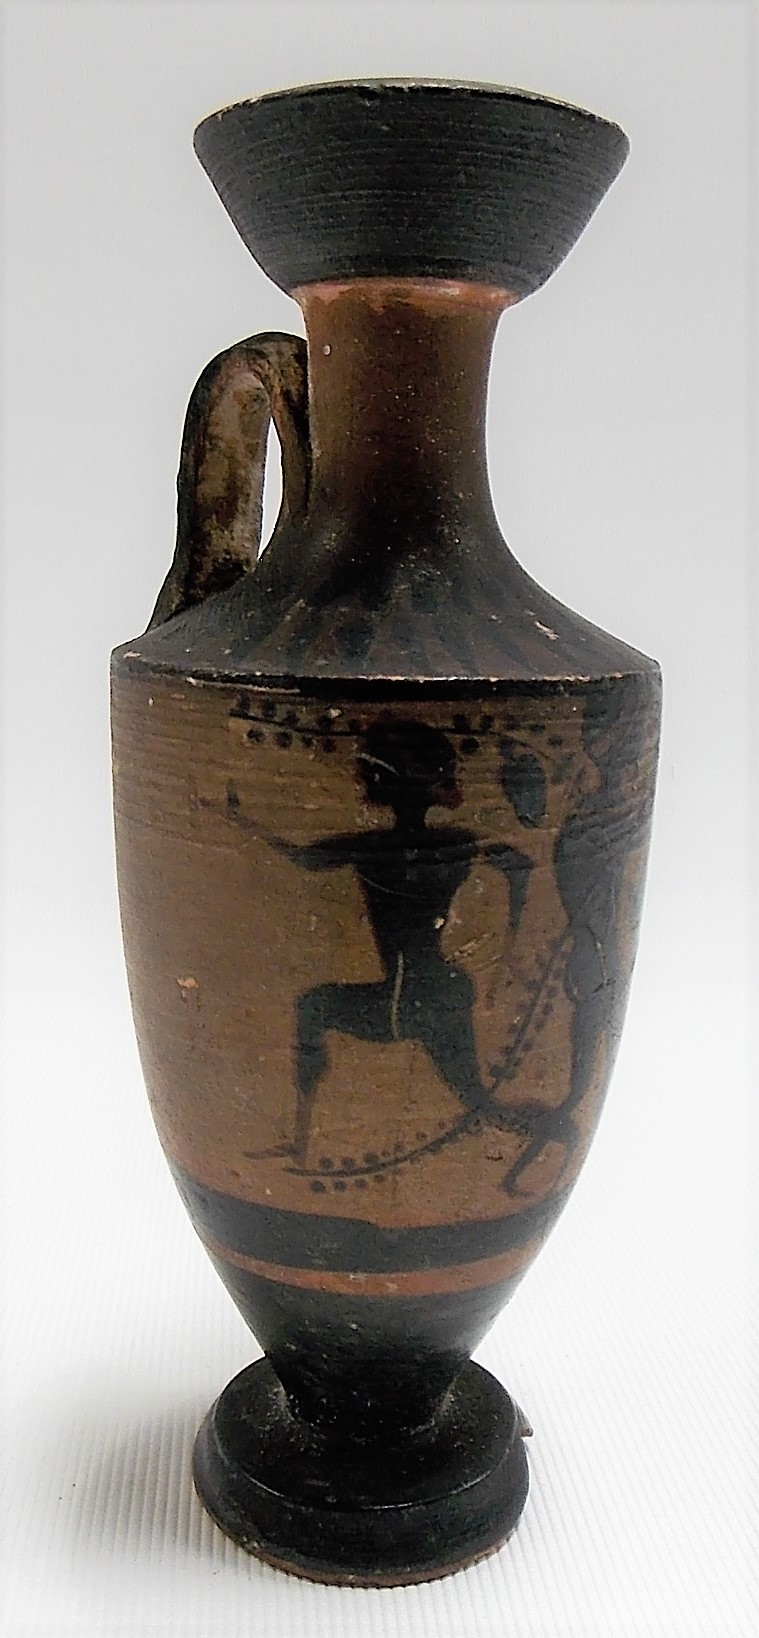 Possibly Ancient Greek Attic miniature amphora vase, the sides painted with three nude figures in